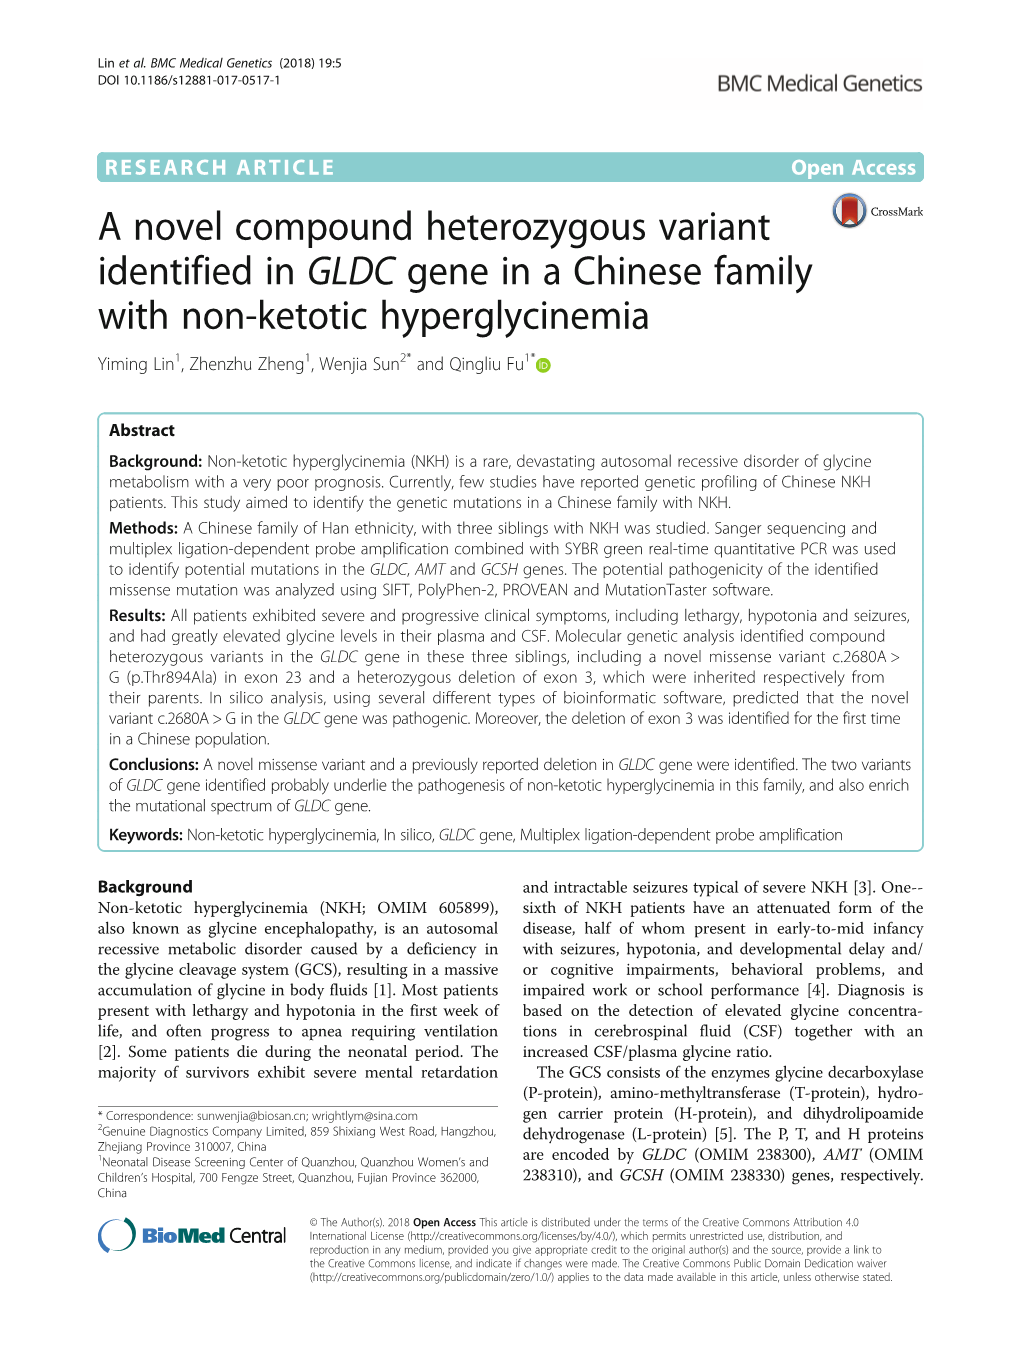 A Novel Compound Heterozygous Variant Identified in GLDC Gene in a Chinese Family with Non-Ketotic Hyperglycinemia